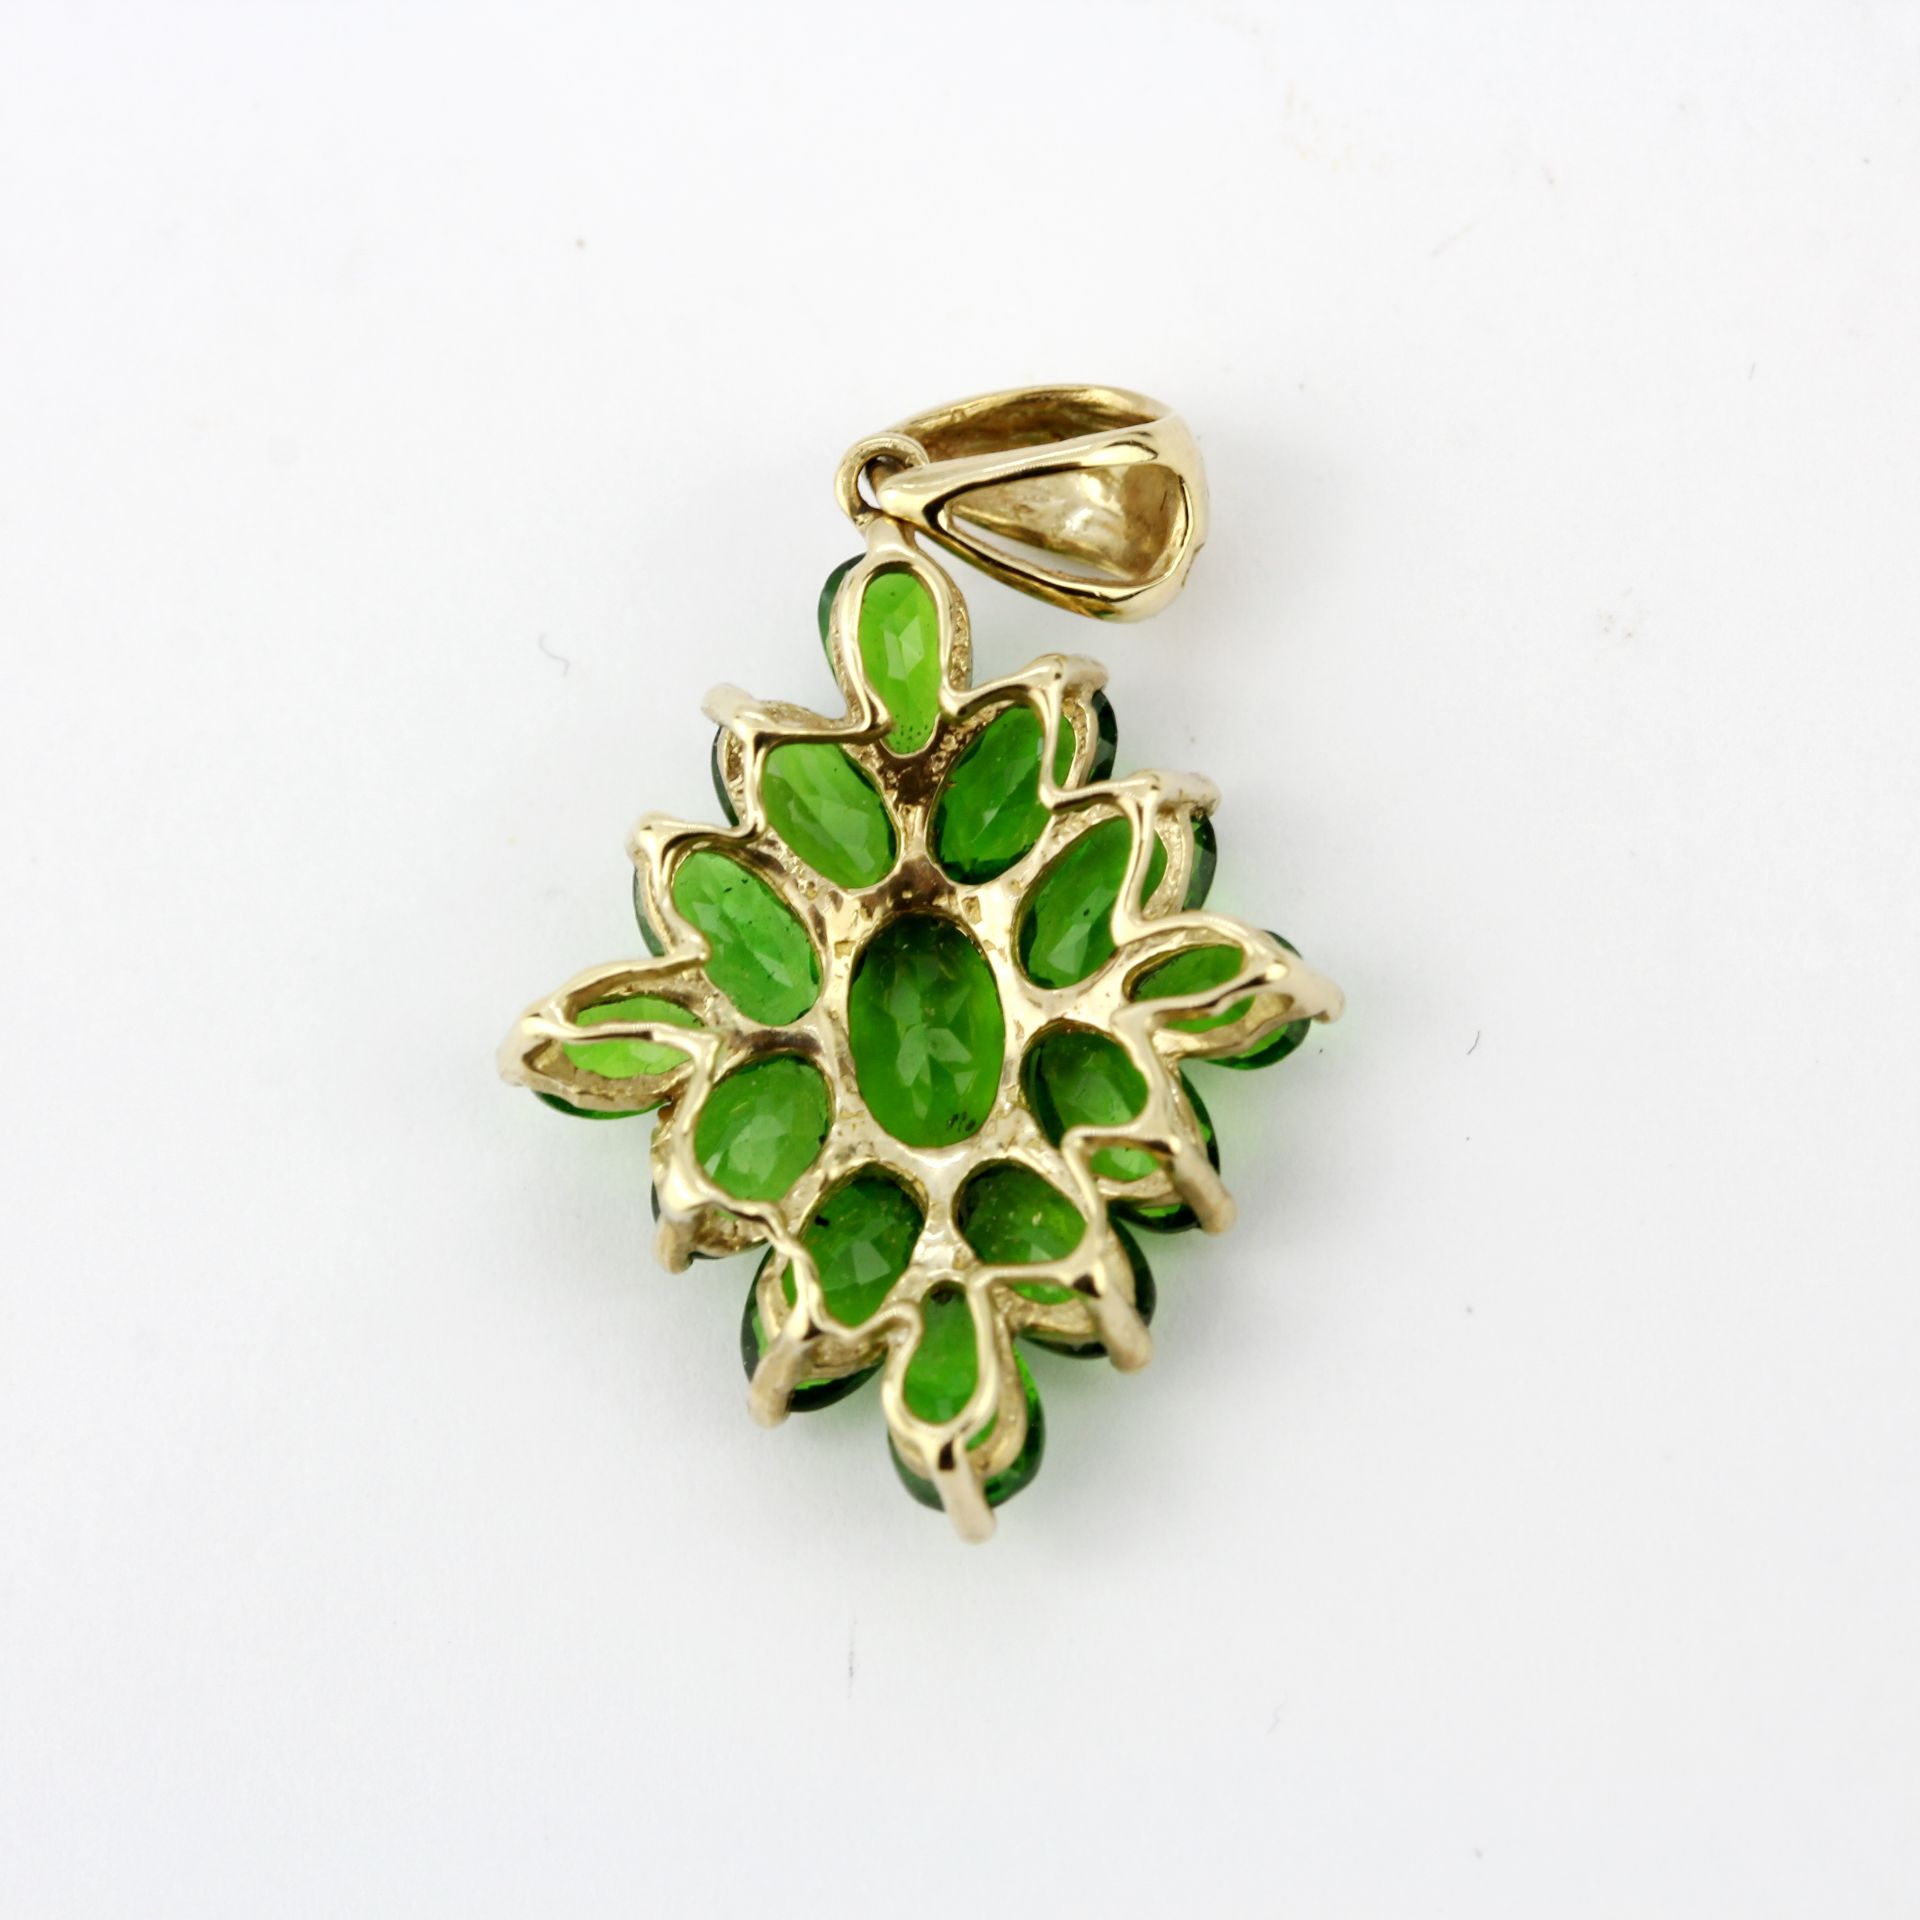 A 9ct yellow gold pendant set with chrome diopsides, L. 2.7cm. - Image 2 of 2